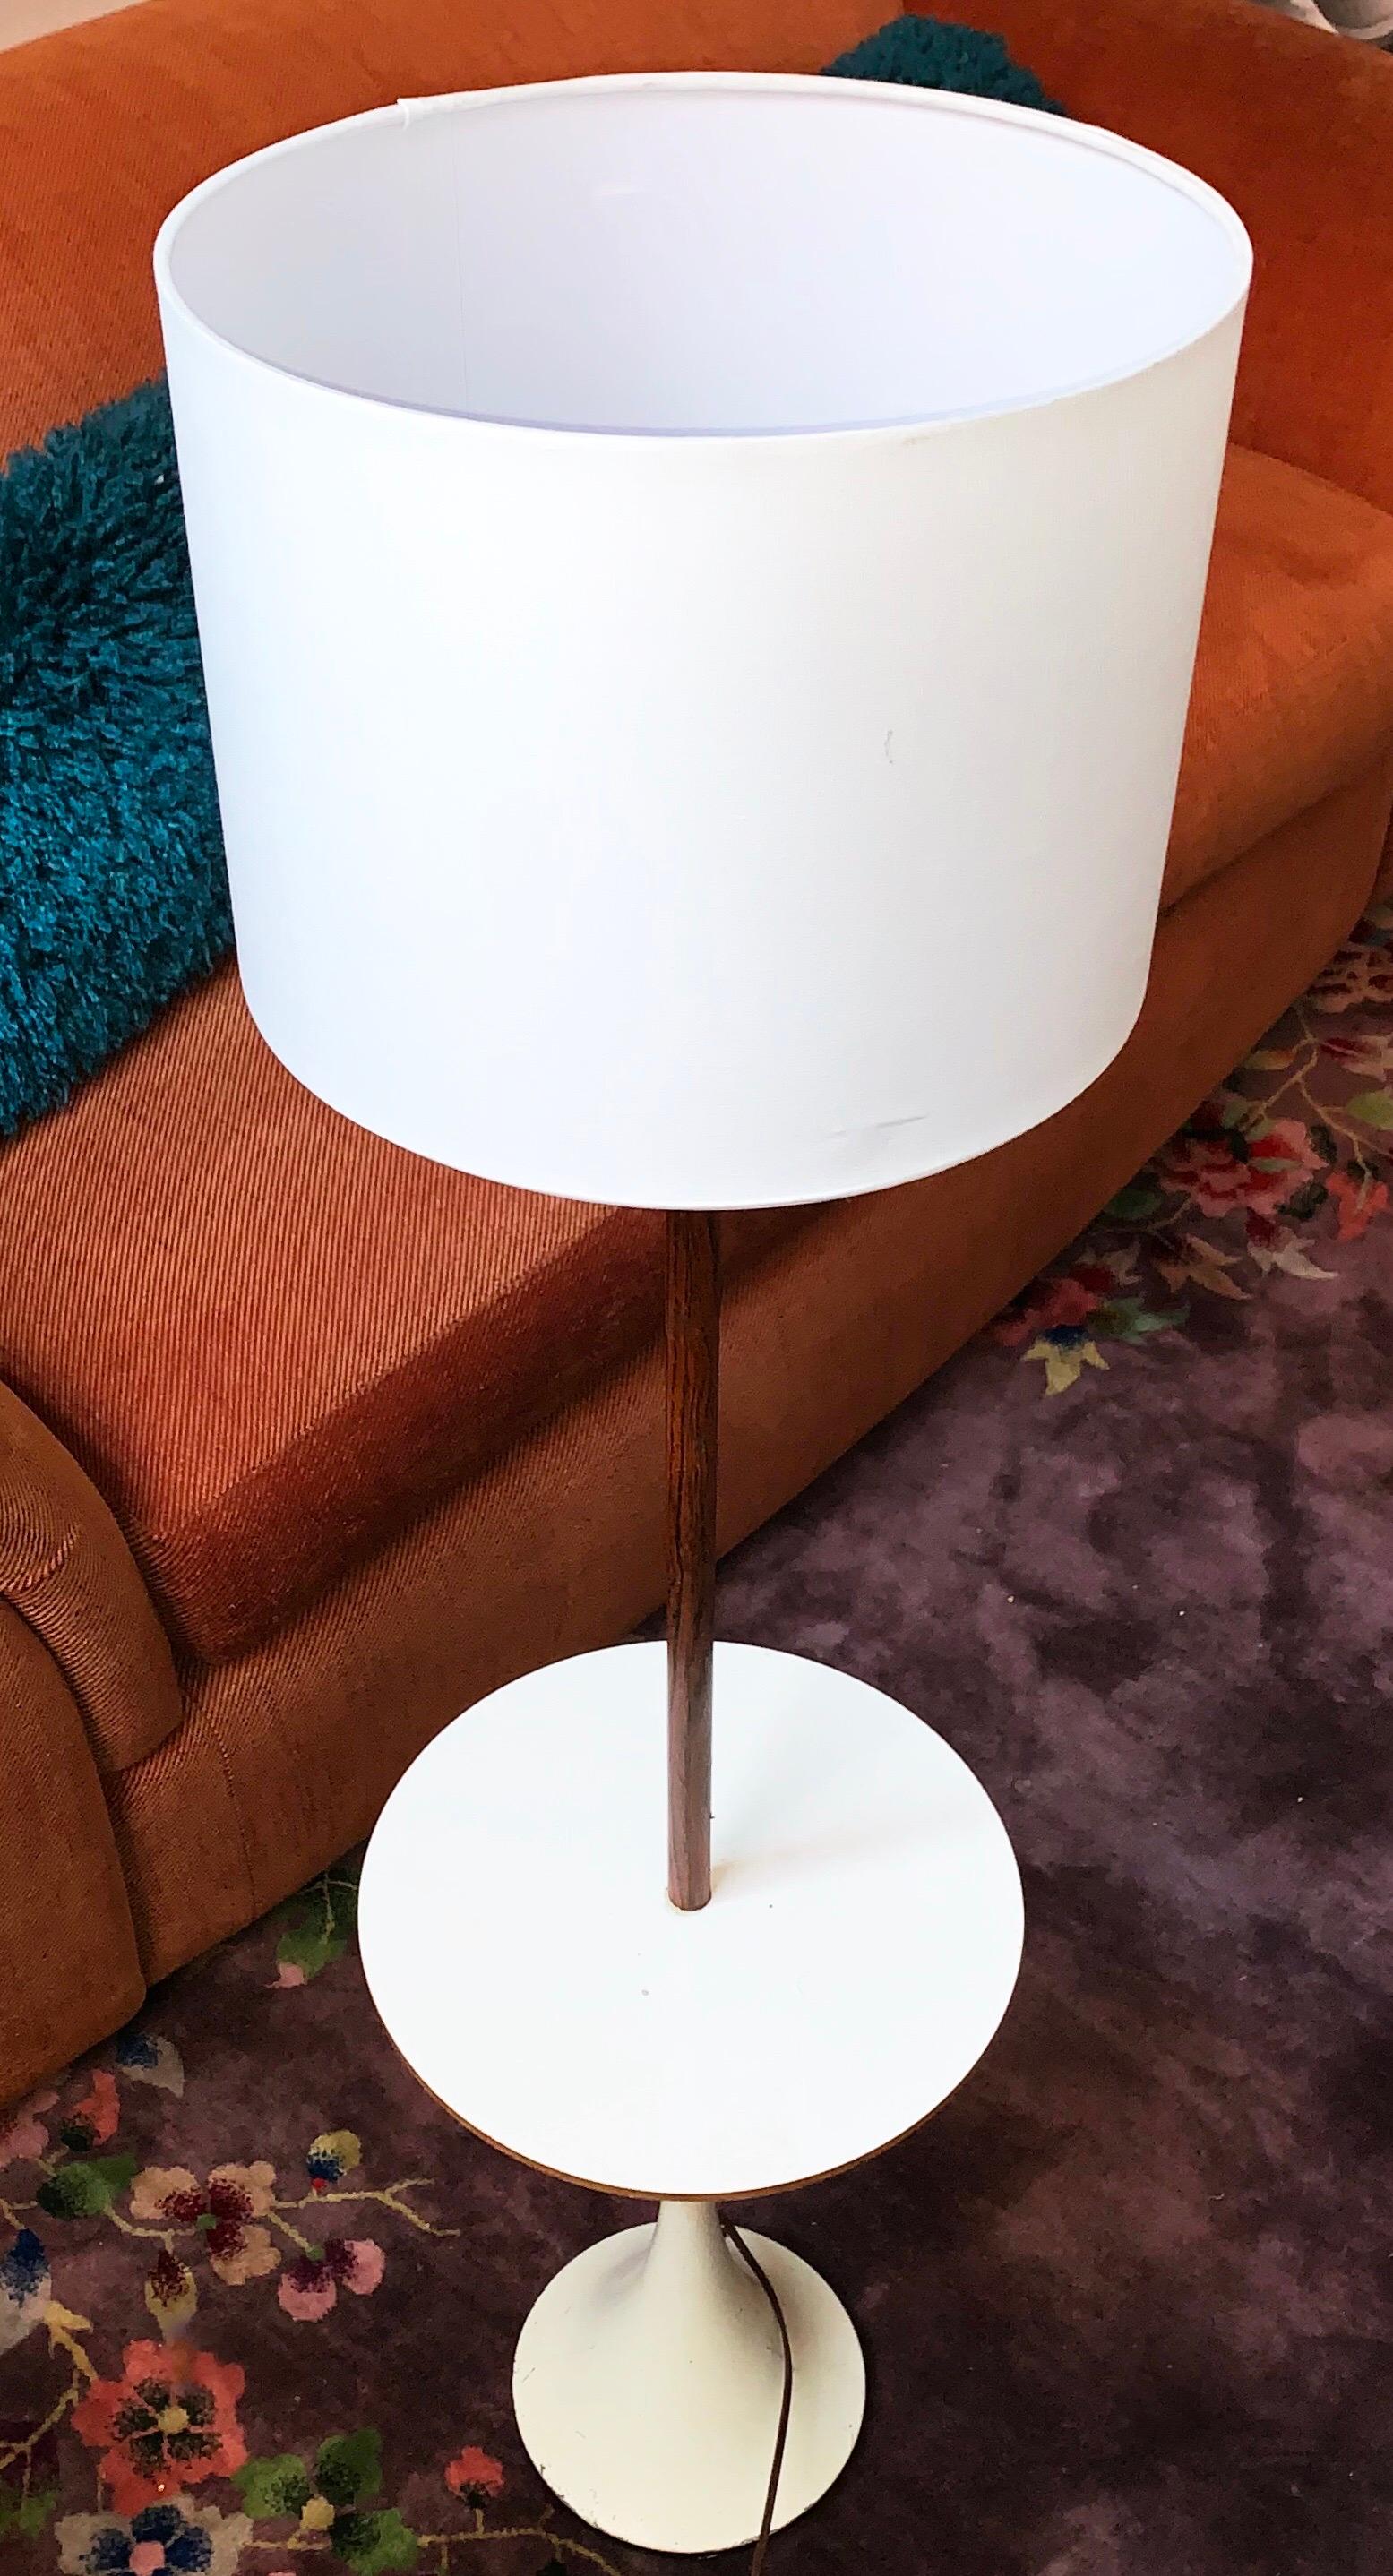 Estelle and Erwine Laverne for Laverne originals - Tulip base rosewood lamp table floor lamp. Maker’s mark on underside. Extremely rare example of a piece by E & E Laverne that includes wood of any sort (rosewood) alongside the non-traditional